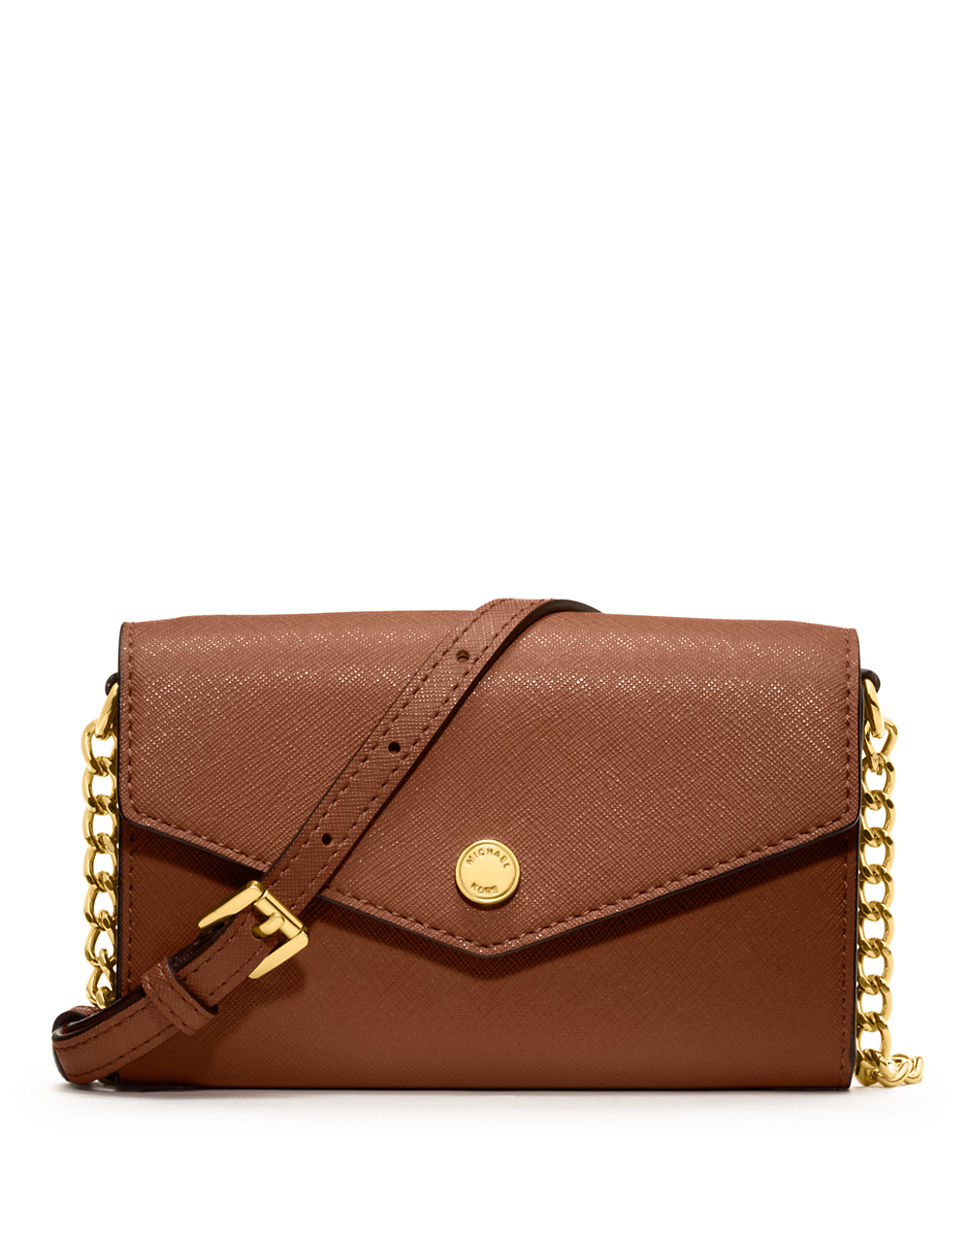 Michael Michael Kors Saffiano Leather Crossbody Phone Bag in Brown (LUGGAGE) | Lyst